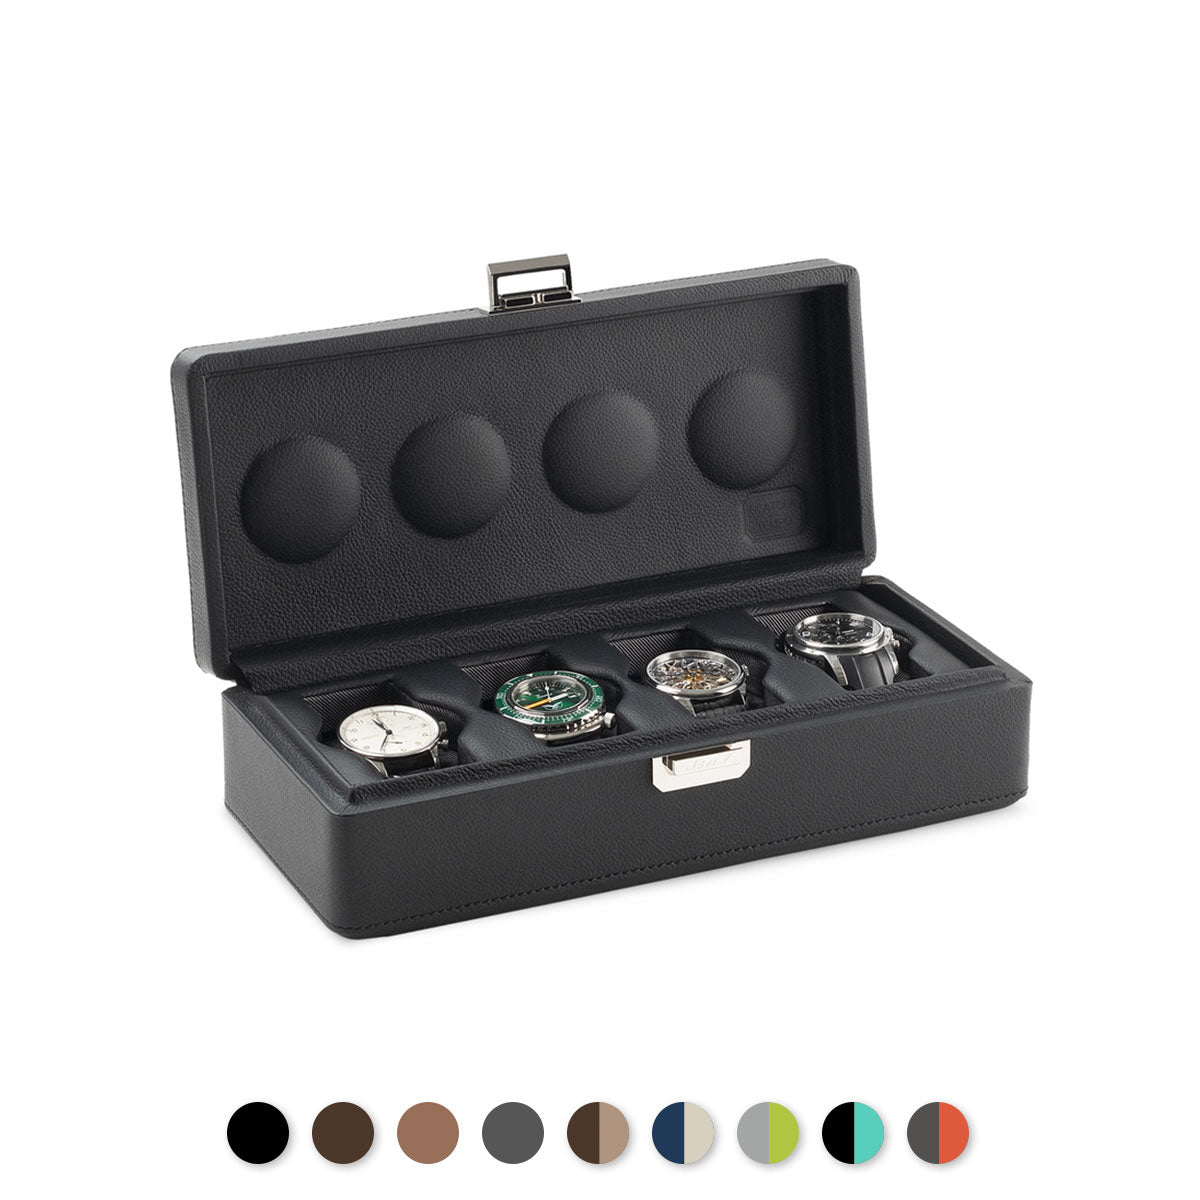 ​Scatola del Tempo - 4 watches leather carrying case Valigetta Compact